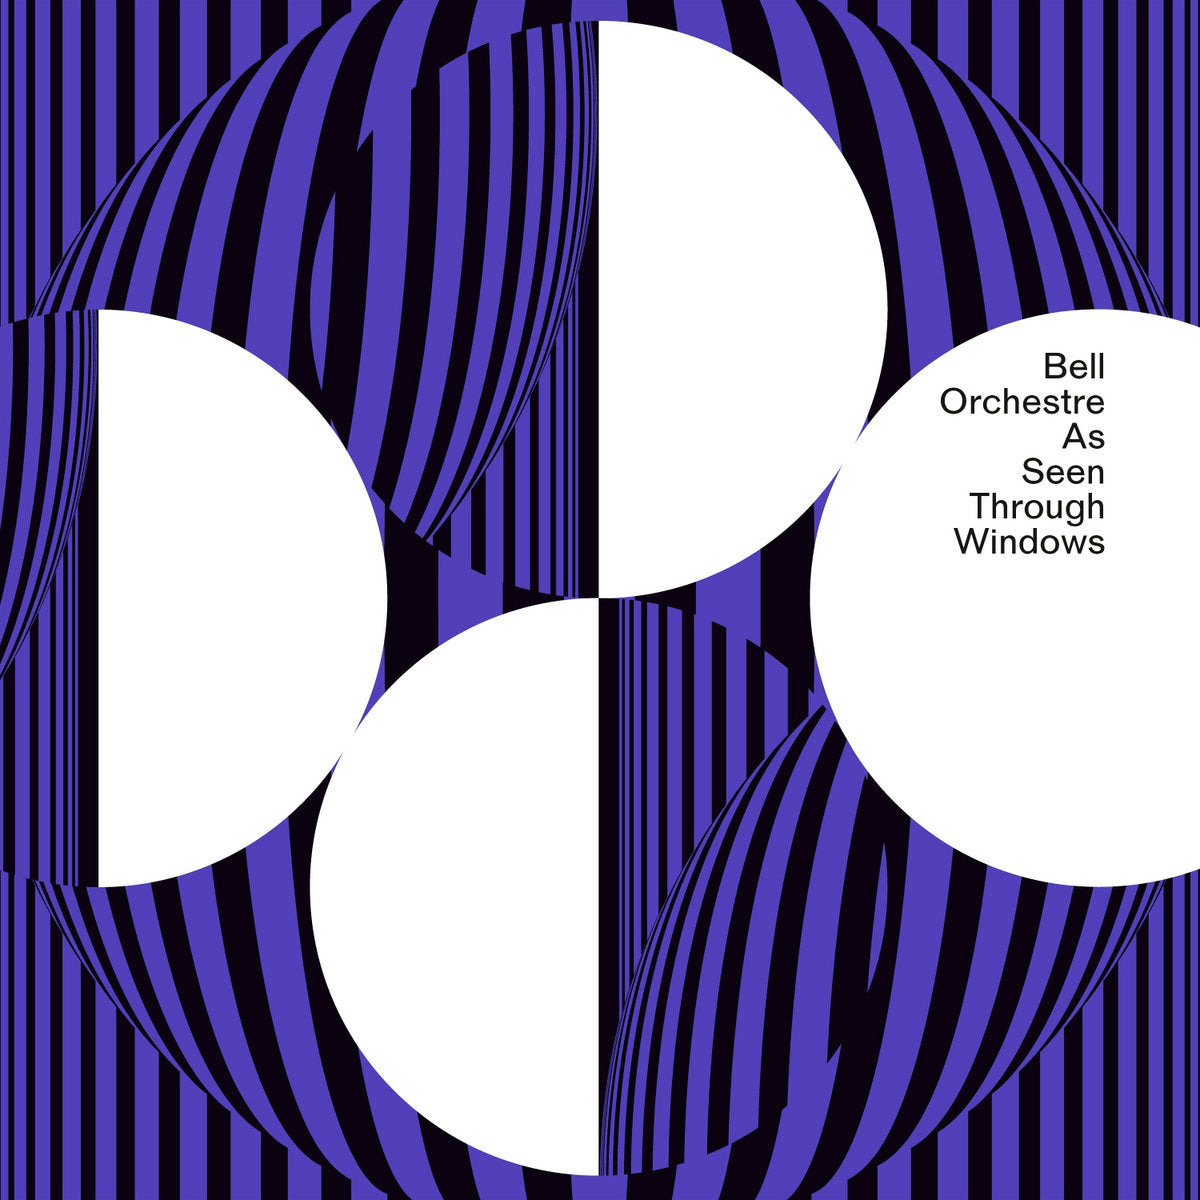 BELL ORCHESTRE - As Seen Through Windows (2023 Erased Tapes Reissue) - 2LP - Clear Vinyl [APR 28]